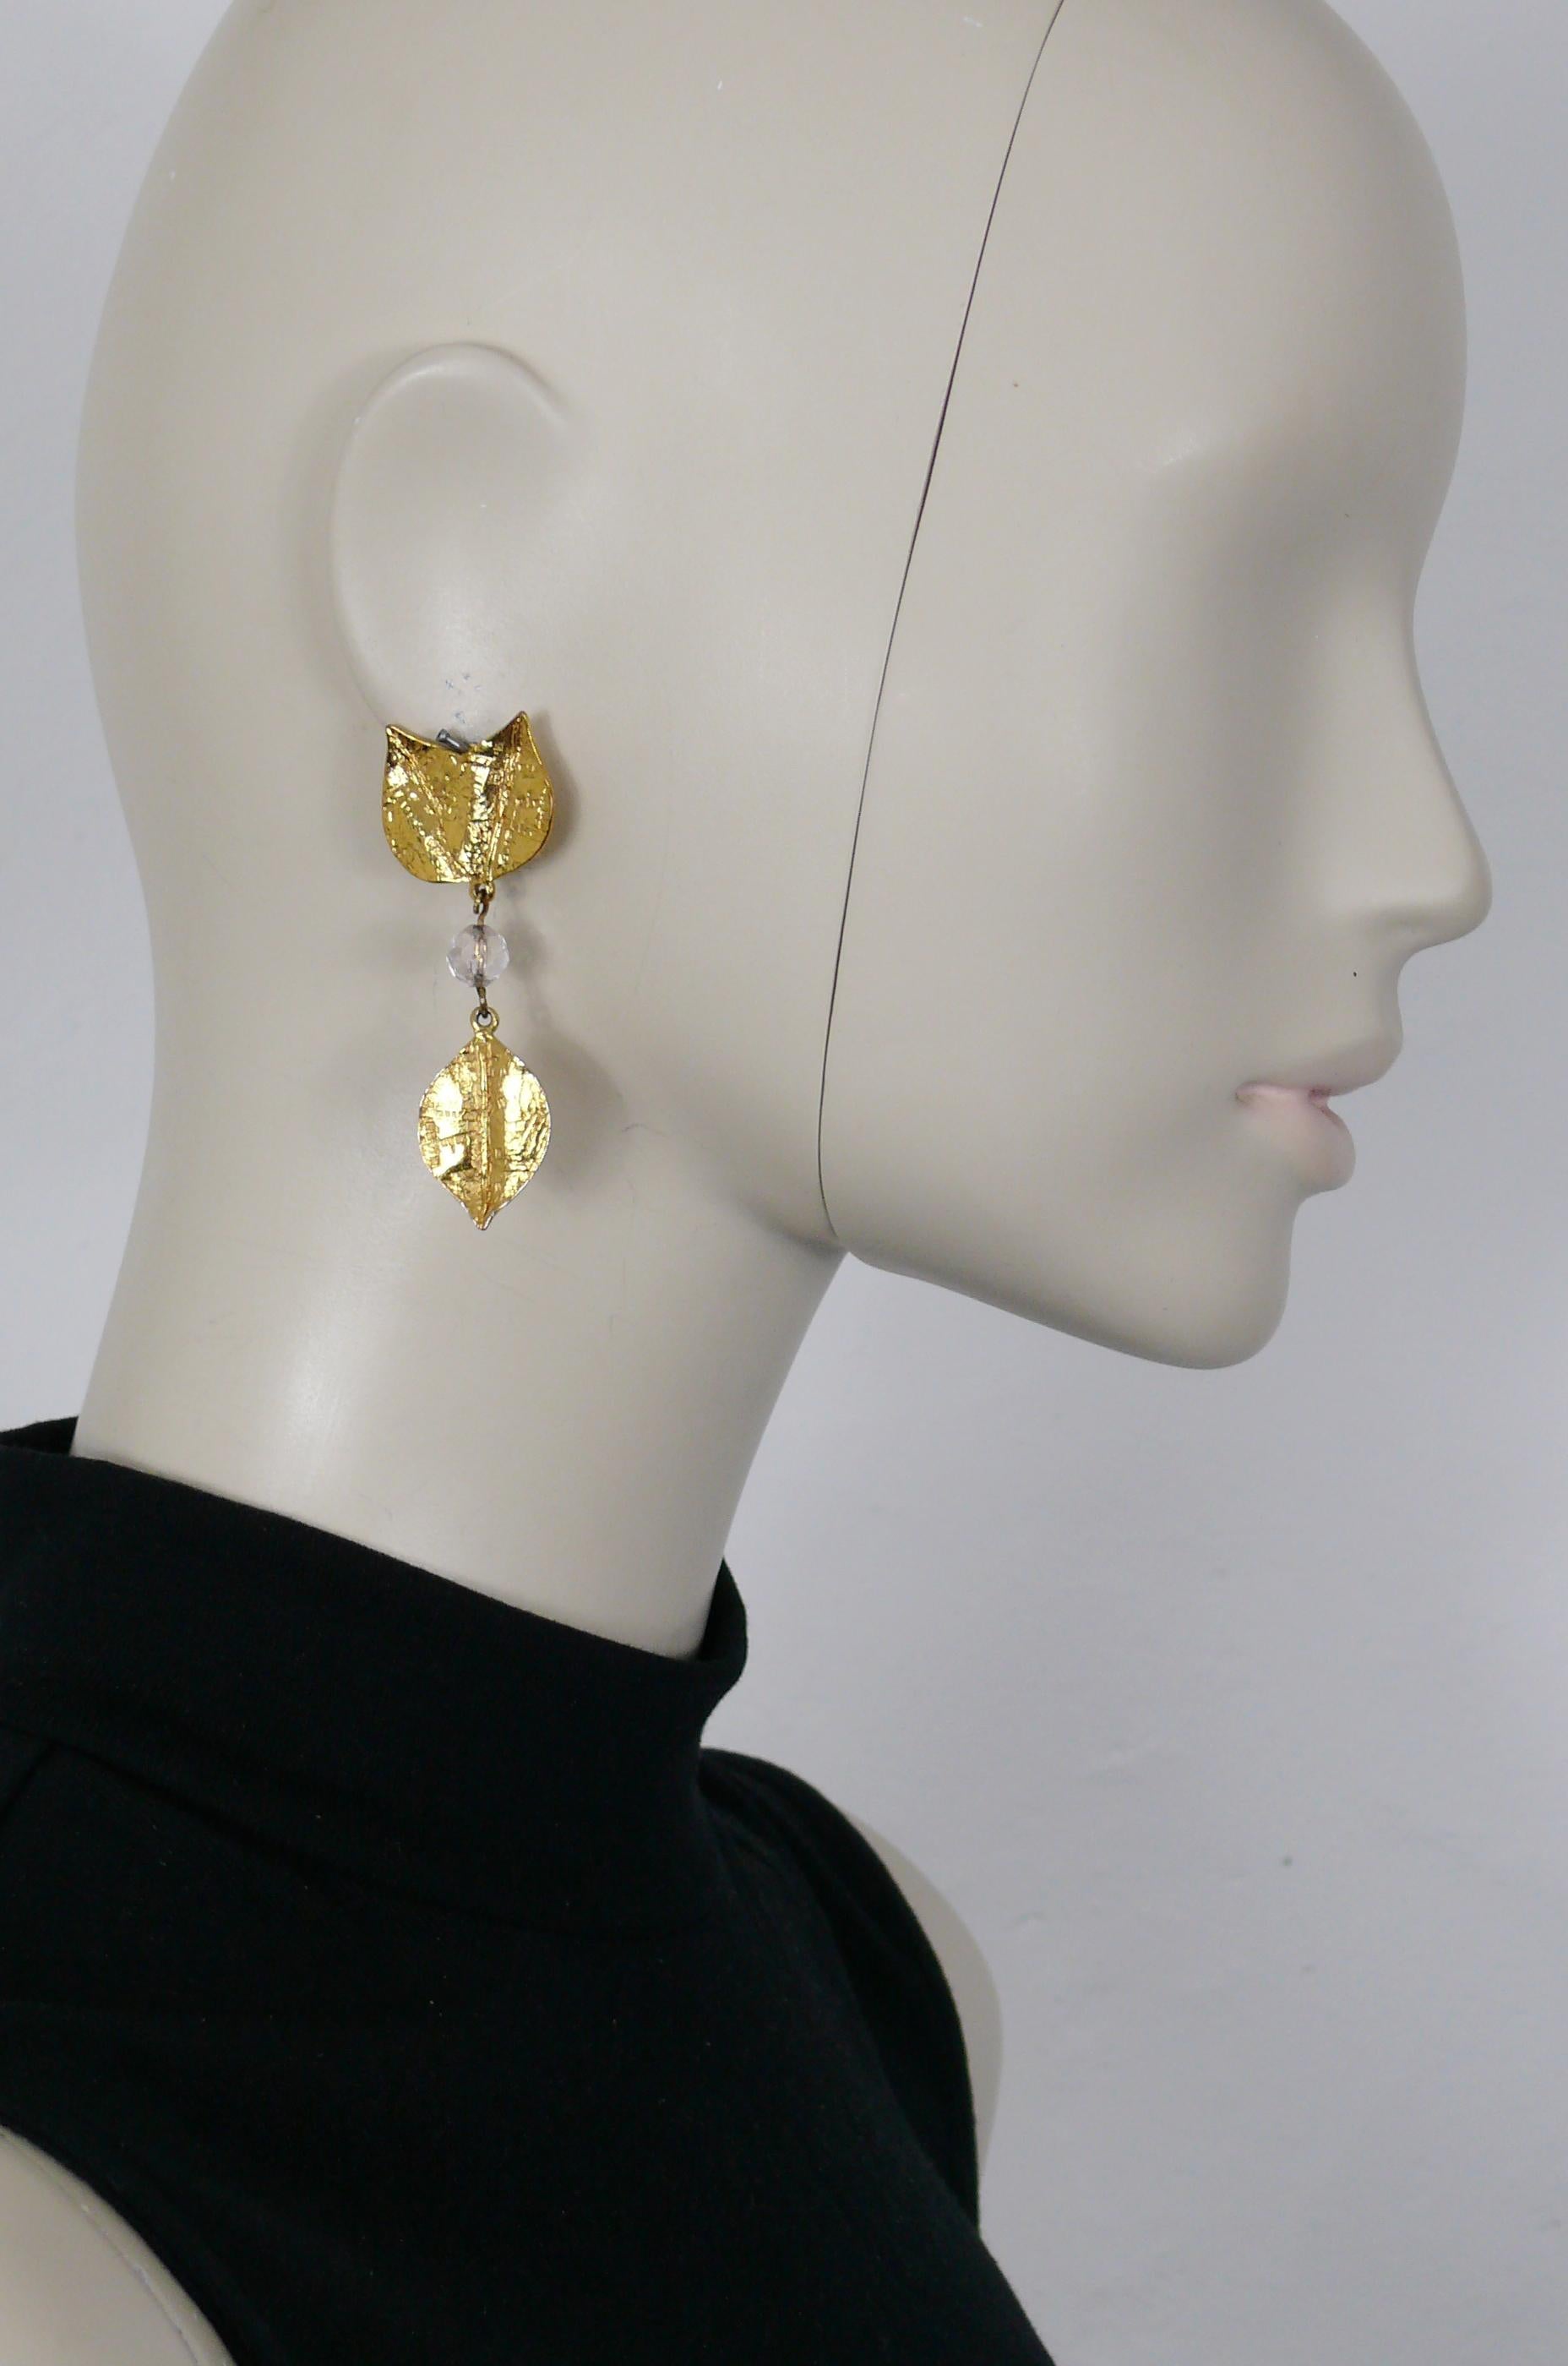 YVES SAINT LAURENT vintage gold toned textured leaves dangling earrings embellished with a facetted clear resin bead.

Embossed YSL Made in France.

Indicative measurements : height approx. 6.1 cm (2.40 inches) / max. width approx. 2.3 cm (0.91